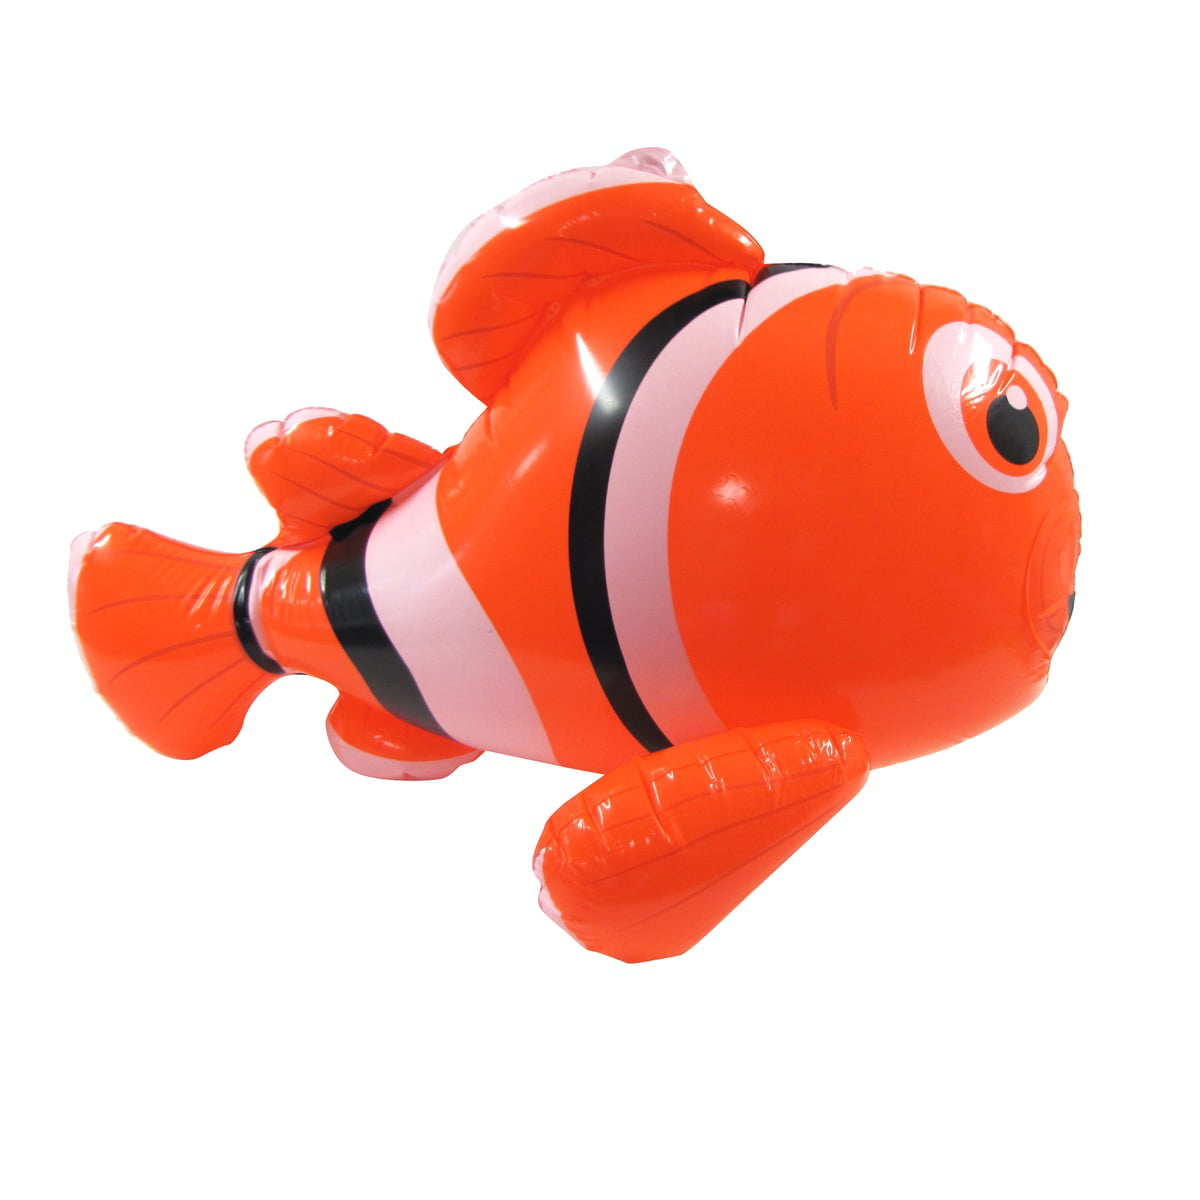 ES453 Pool Toys Summer Accessories Giant Inflatable Clown Fish Pool Float 